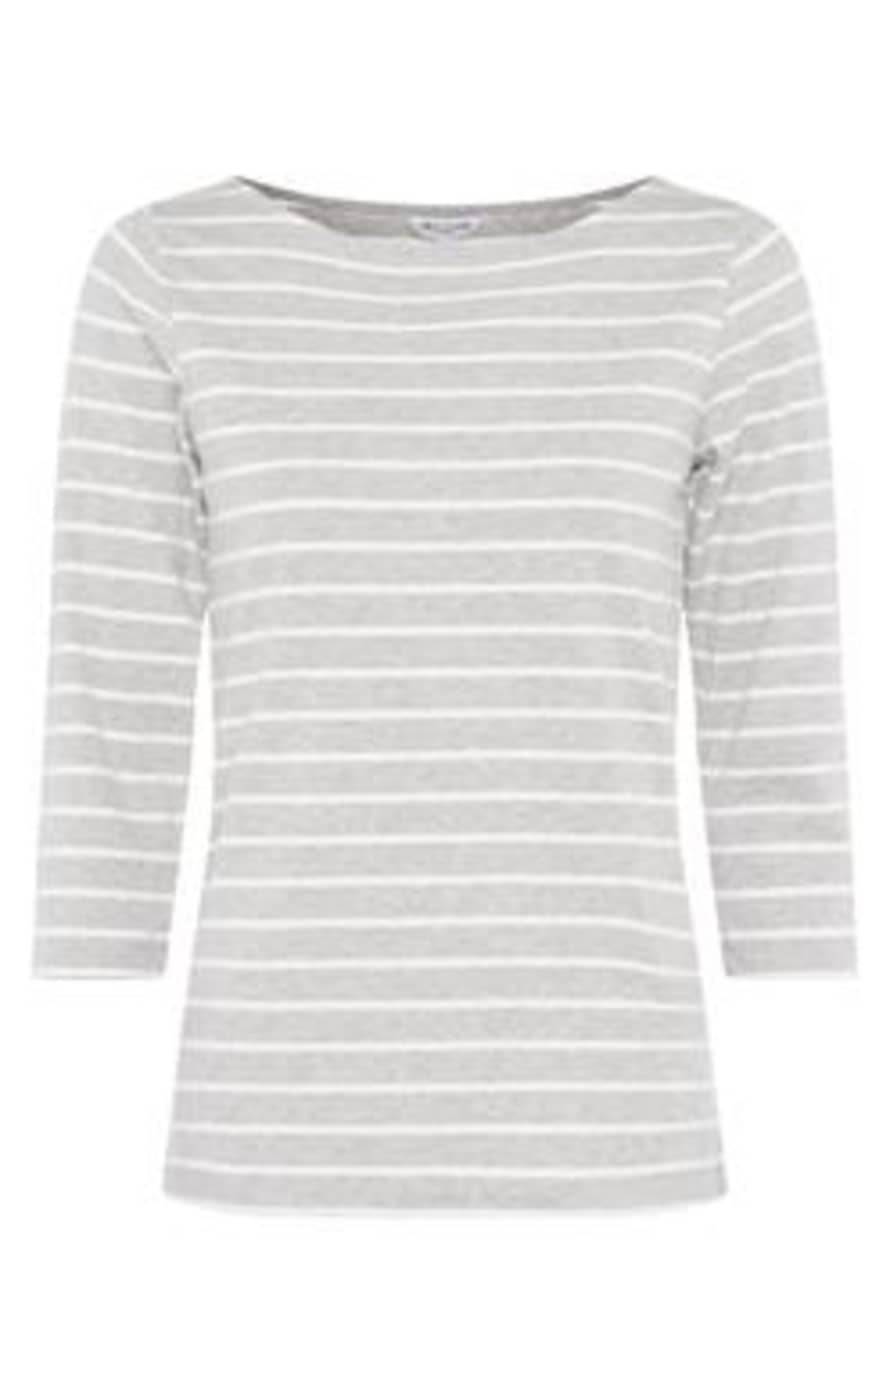 Great Plains Essential Jersey 3 4 Length Sleeve Striped Grey Milk